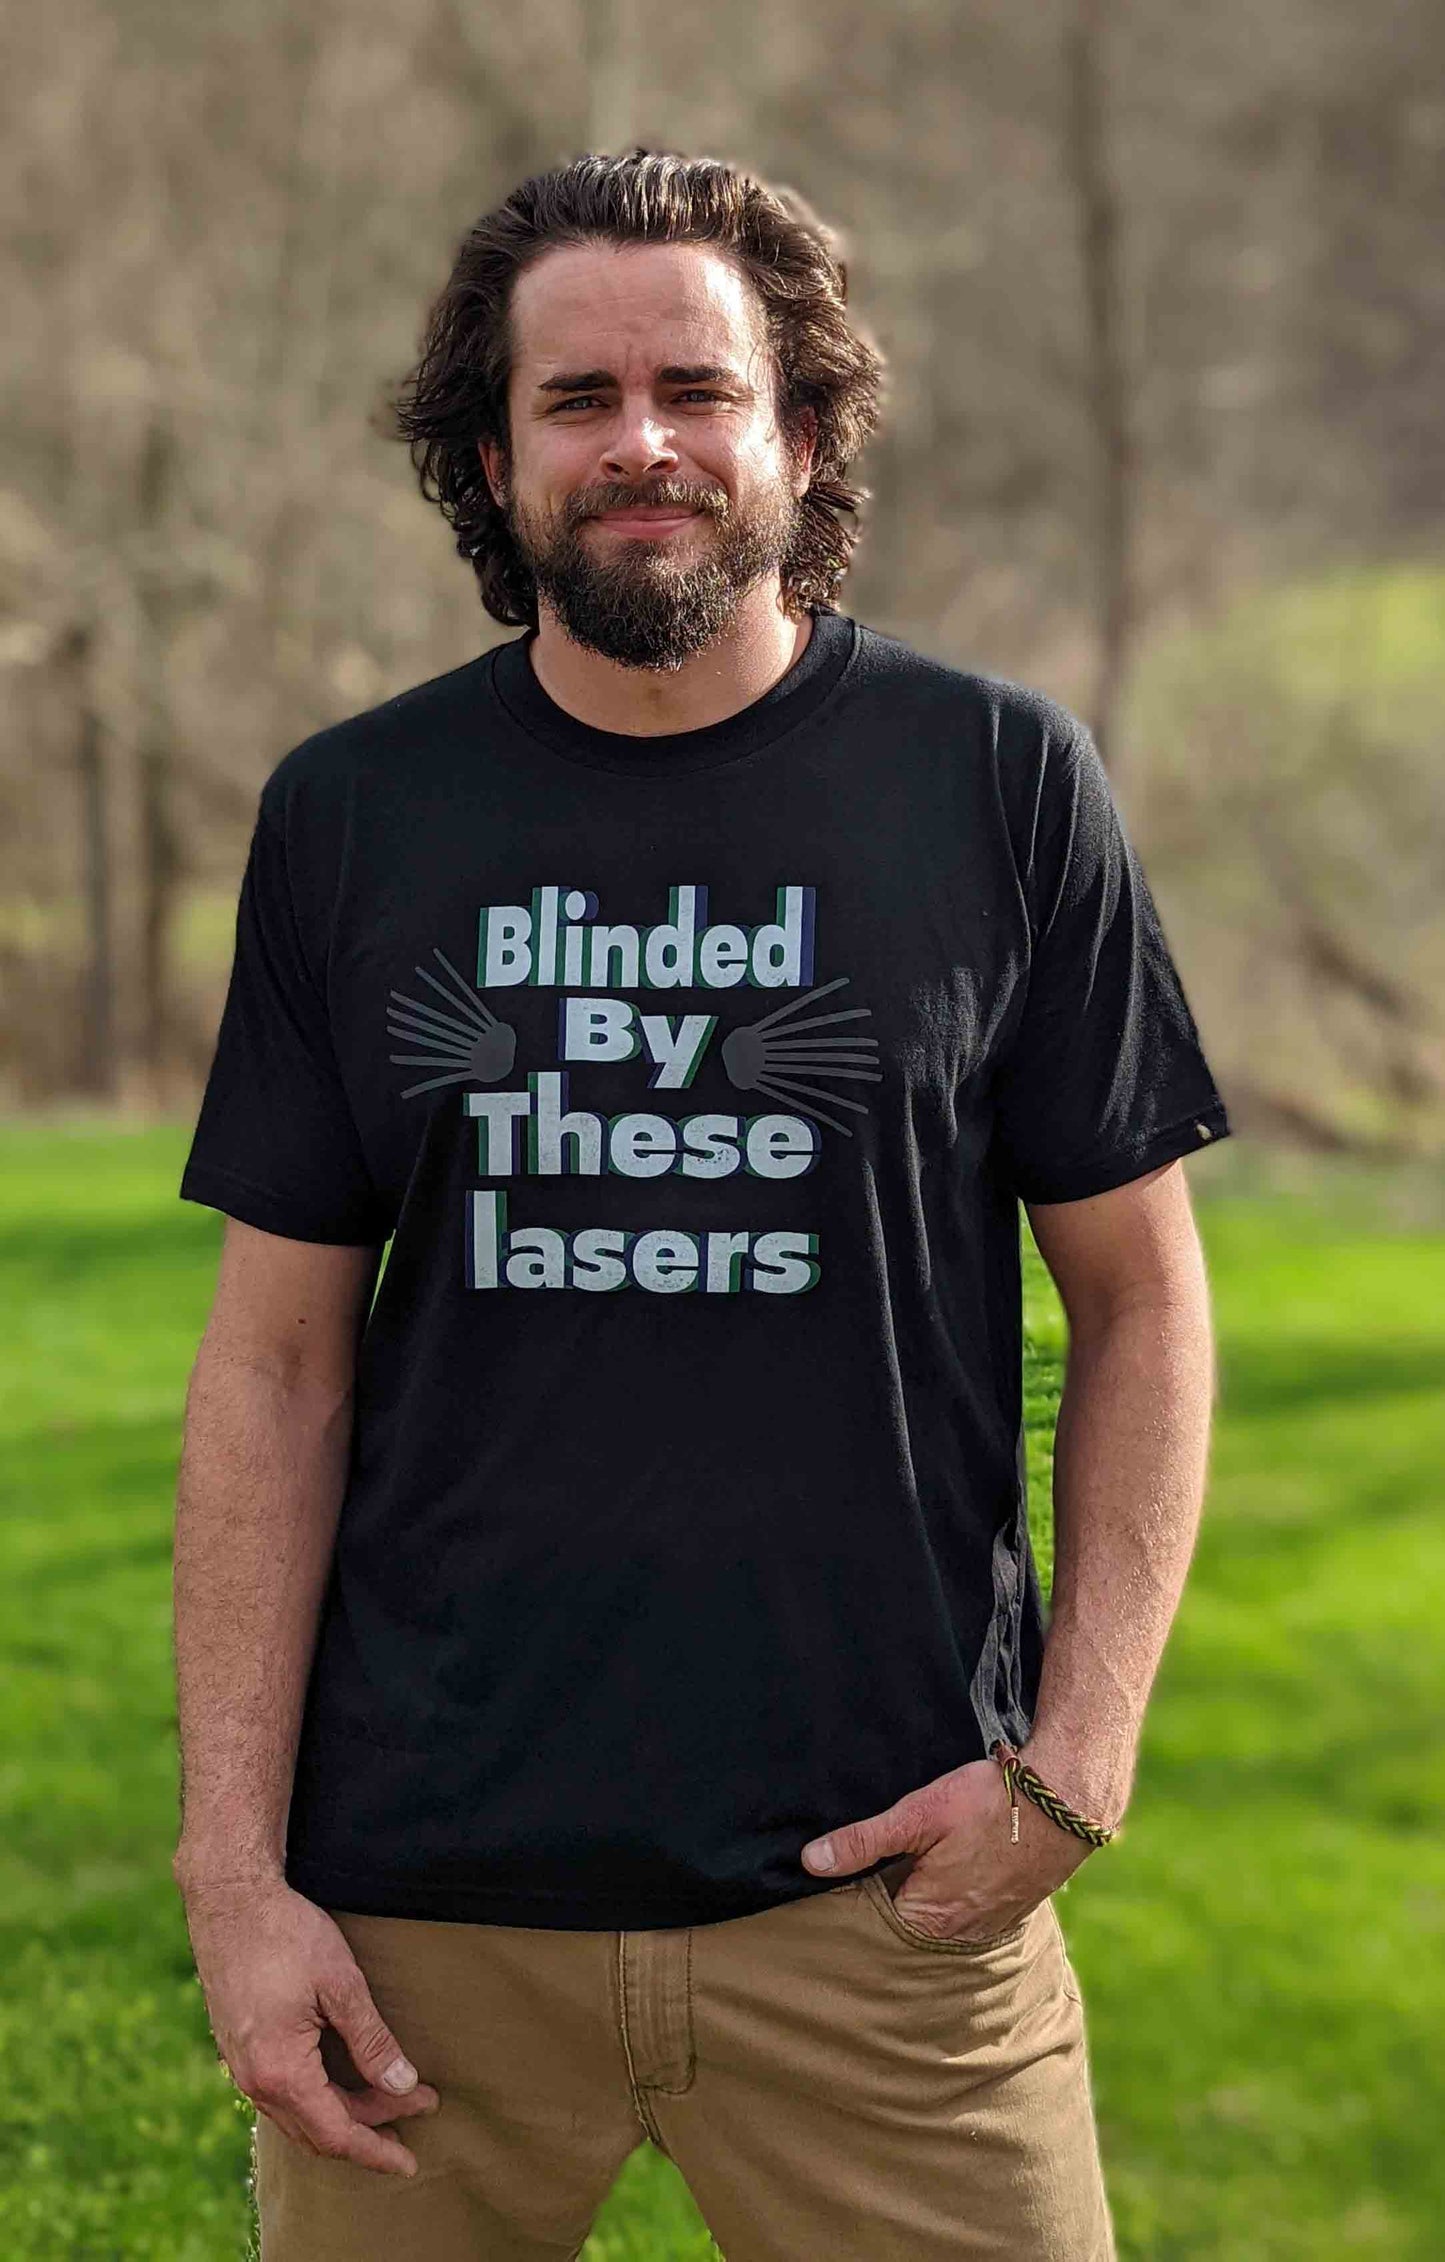 Blinded by these lasers